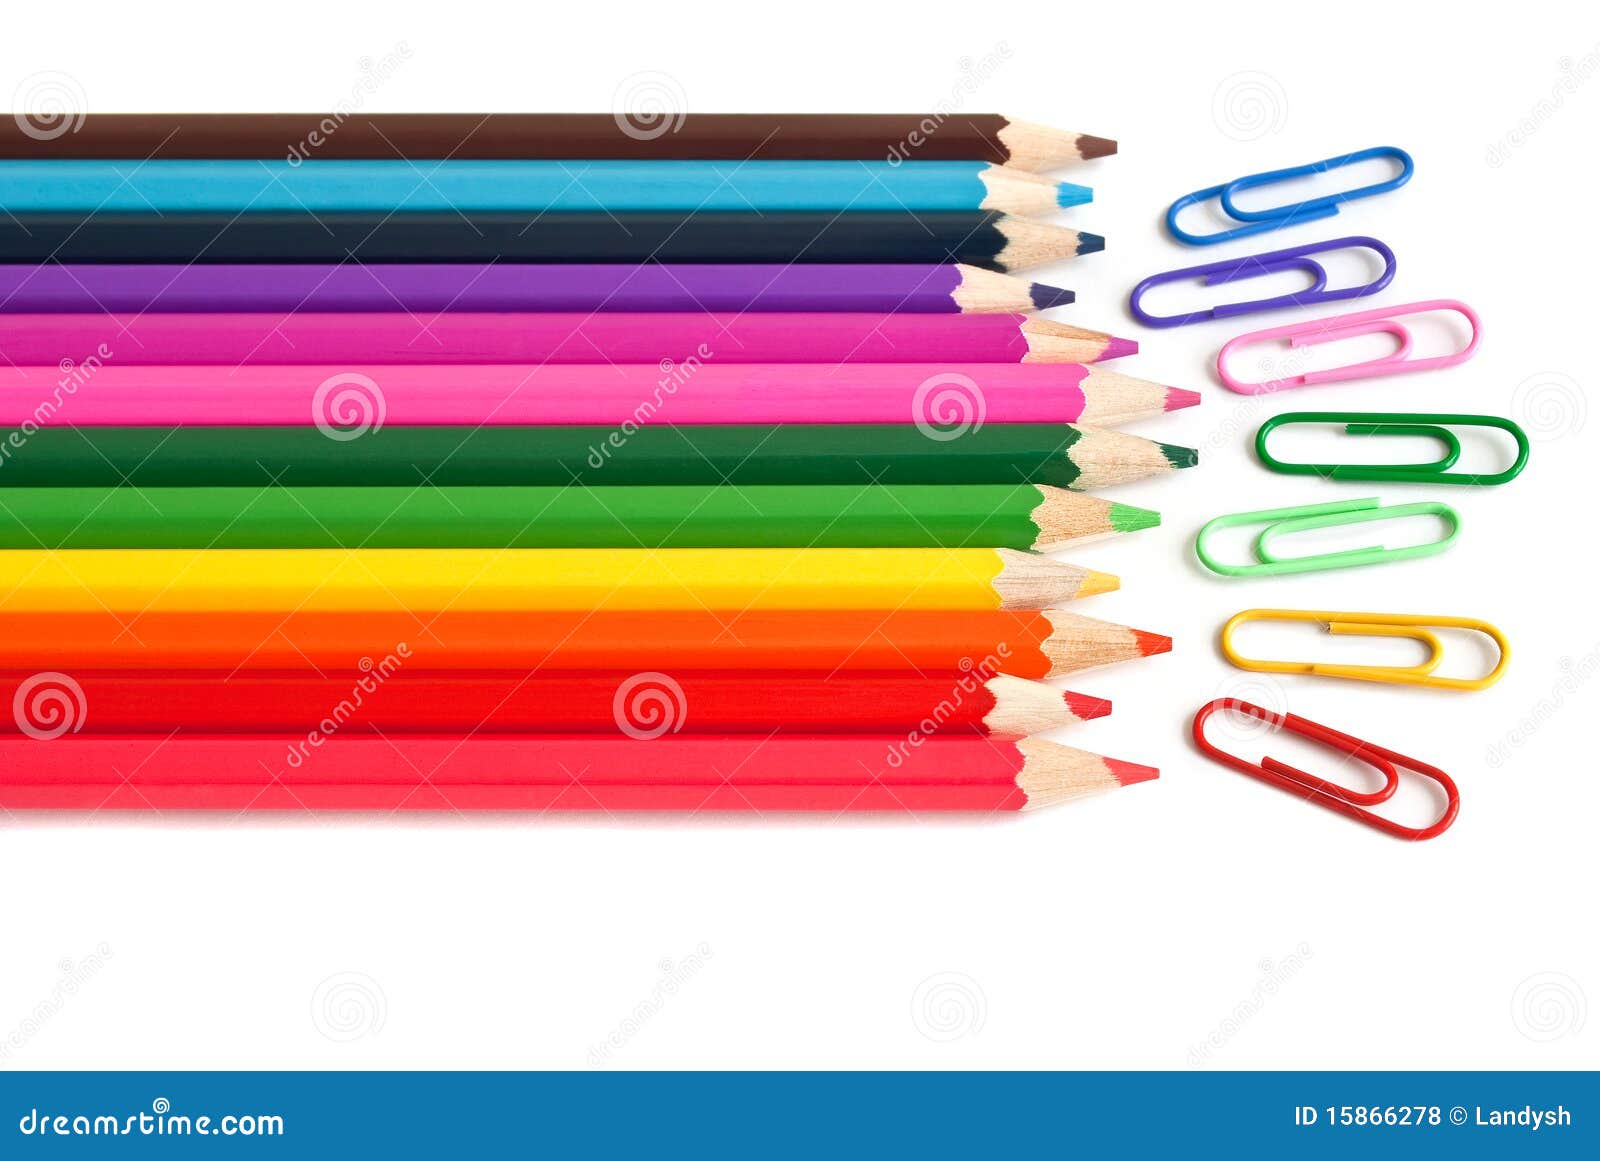 color pencils paper clips office stationery 15866278